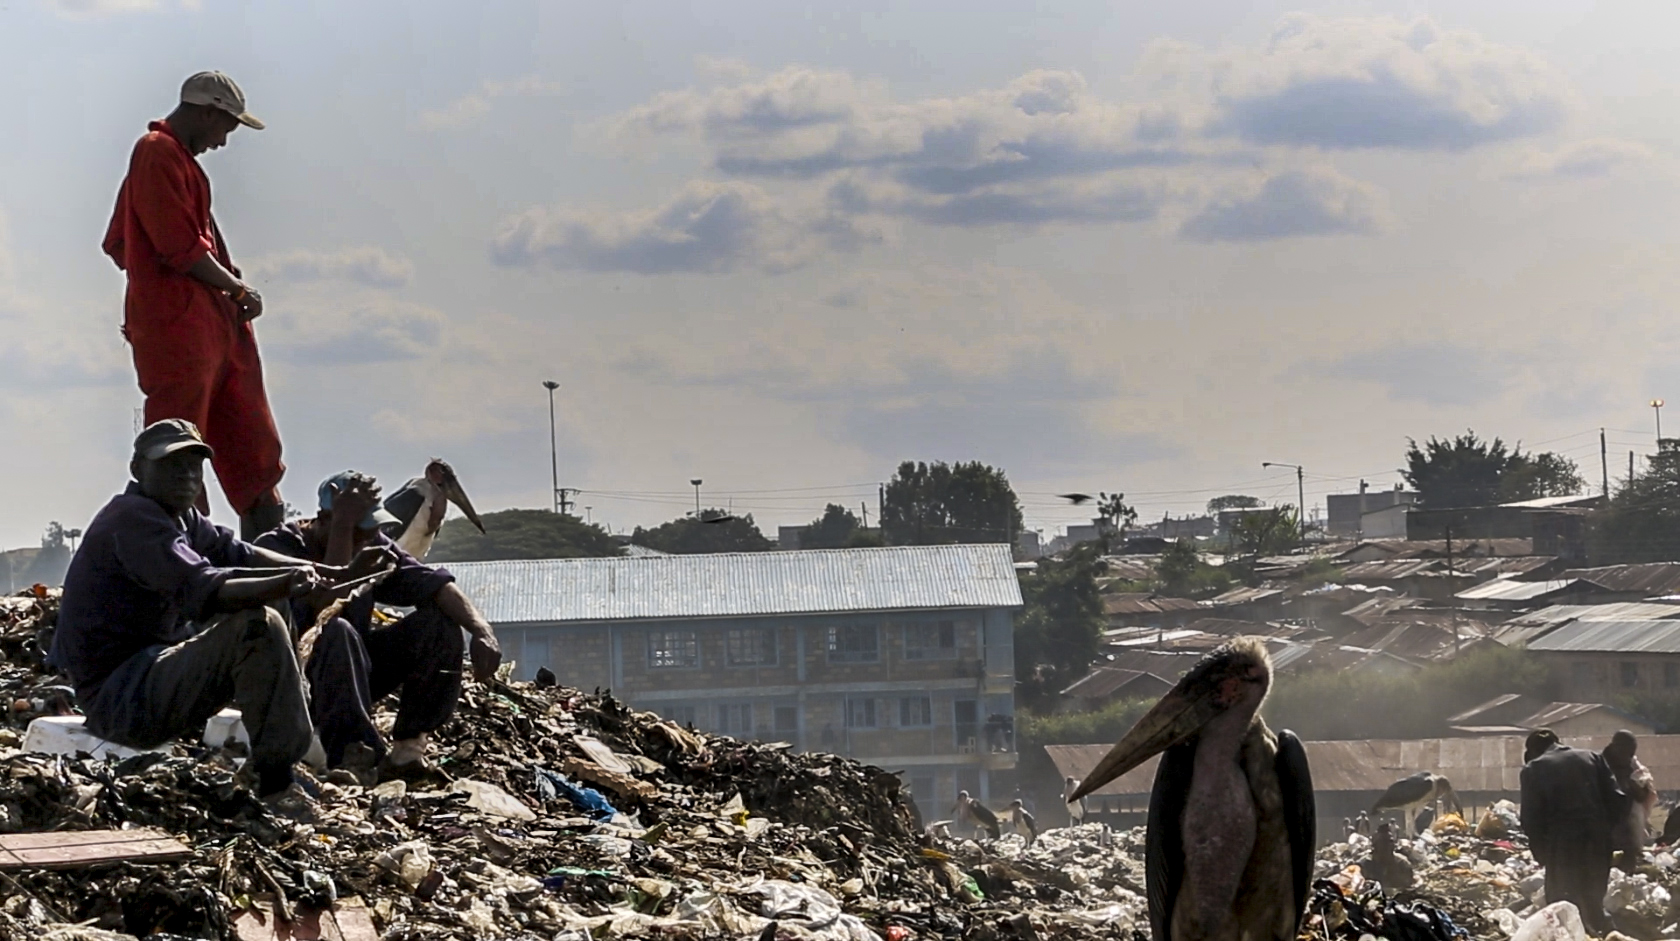  "Tuko Pamoja" - Maribou storks and waste workers often work side by side in Dandora. Plans to relocate the dumpsite to Ruai were dashed in January 2016 when the Kenya Aviation Authority warned that scavenging birds would be too much of a flight risk